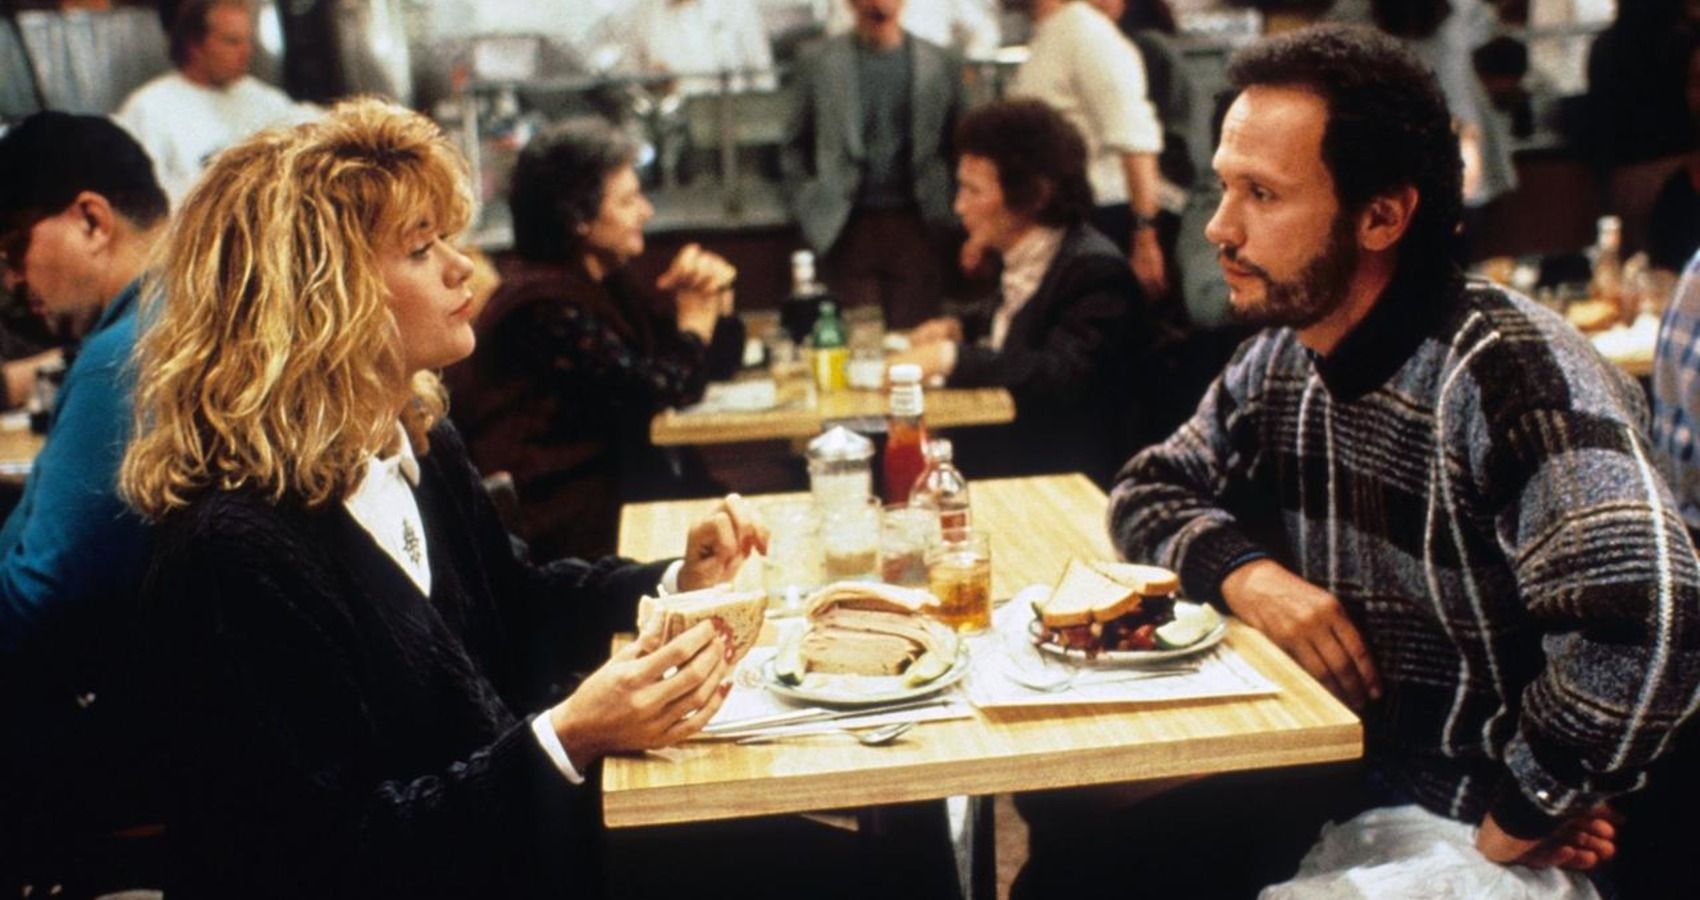 Meg Ryan and Billy Crystal sitting in a diner